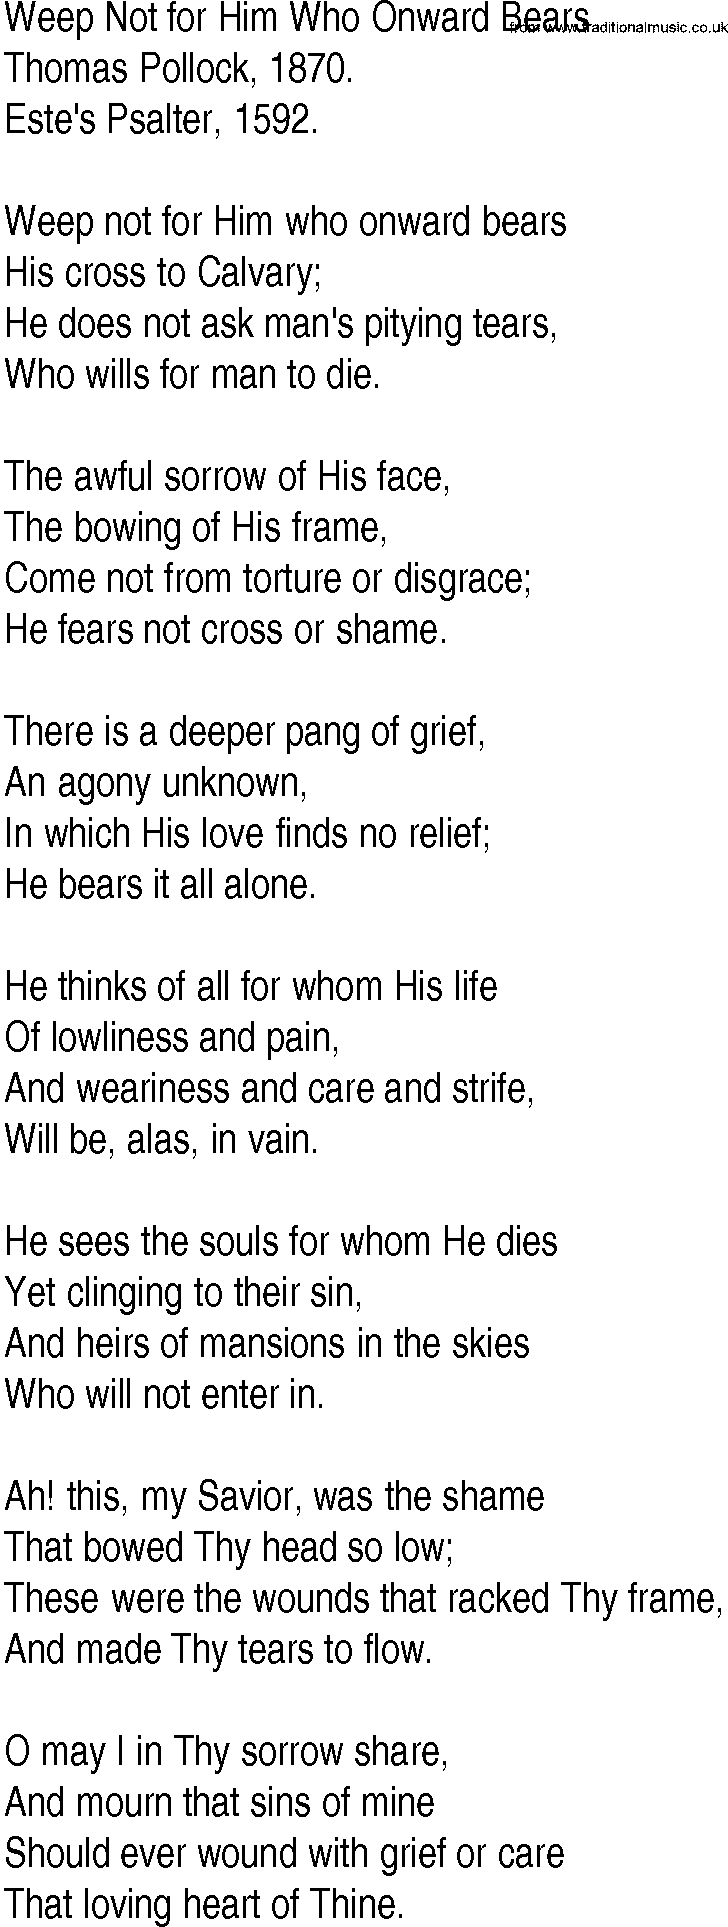 Hymn and Gospel Song: Weep Not for Him Who Onward Bears by Thomas Pollock lyrics